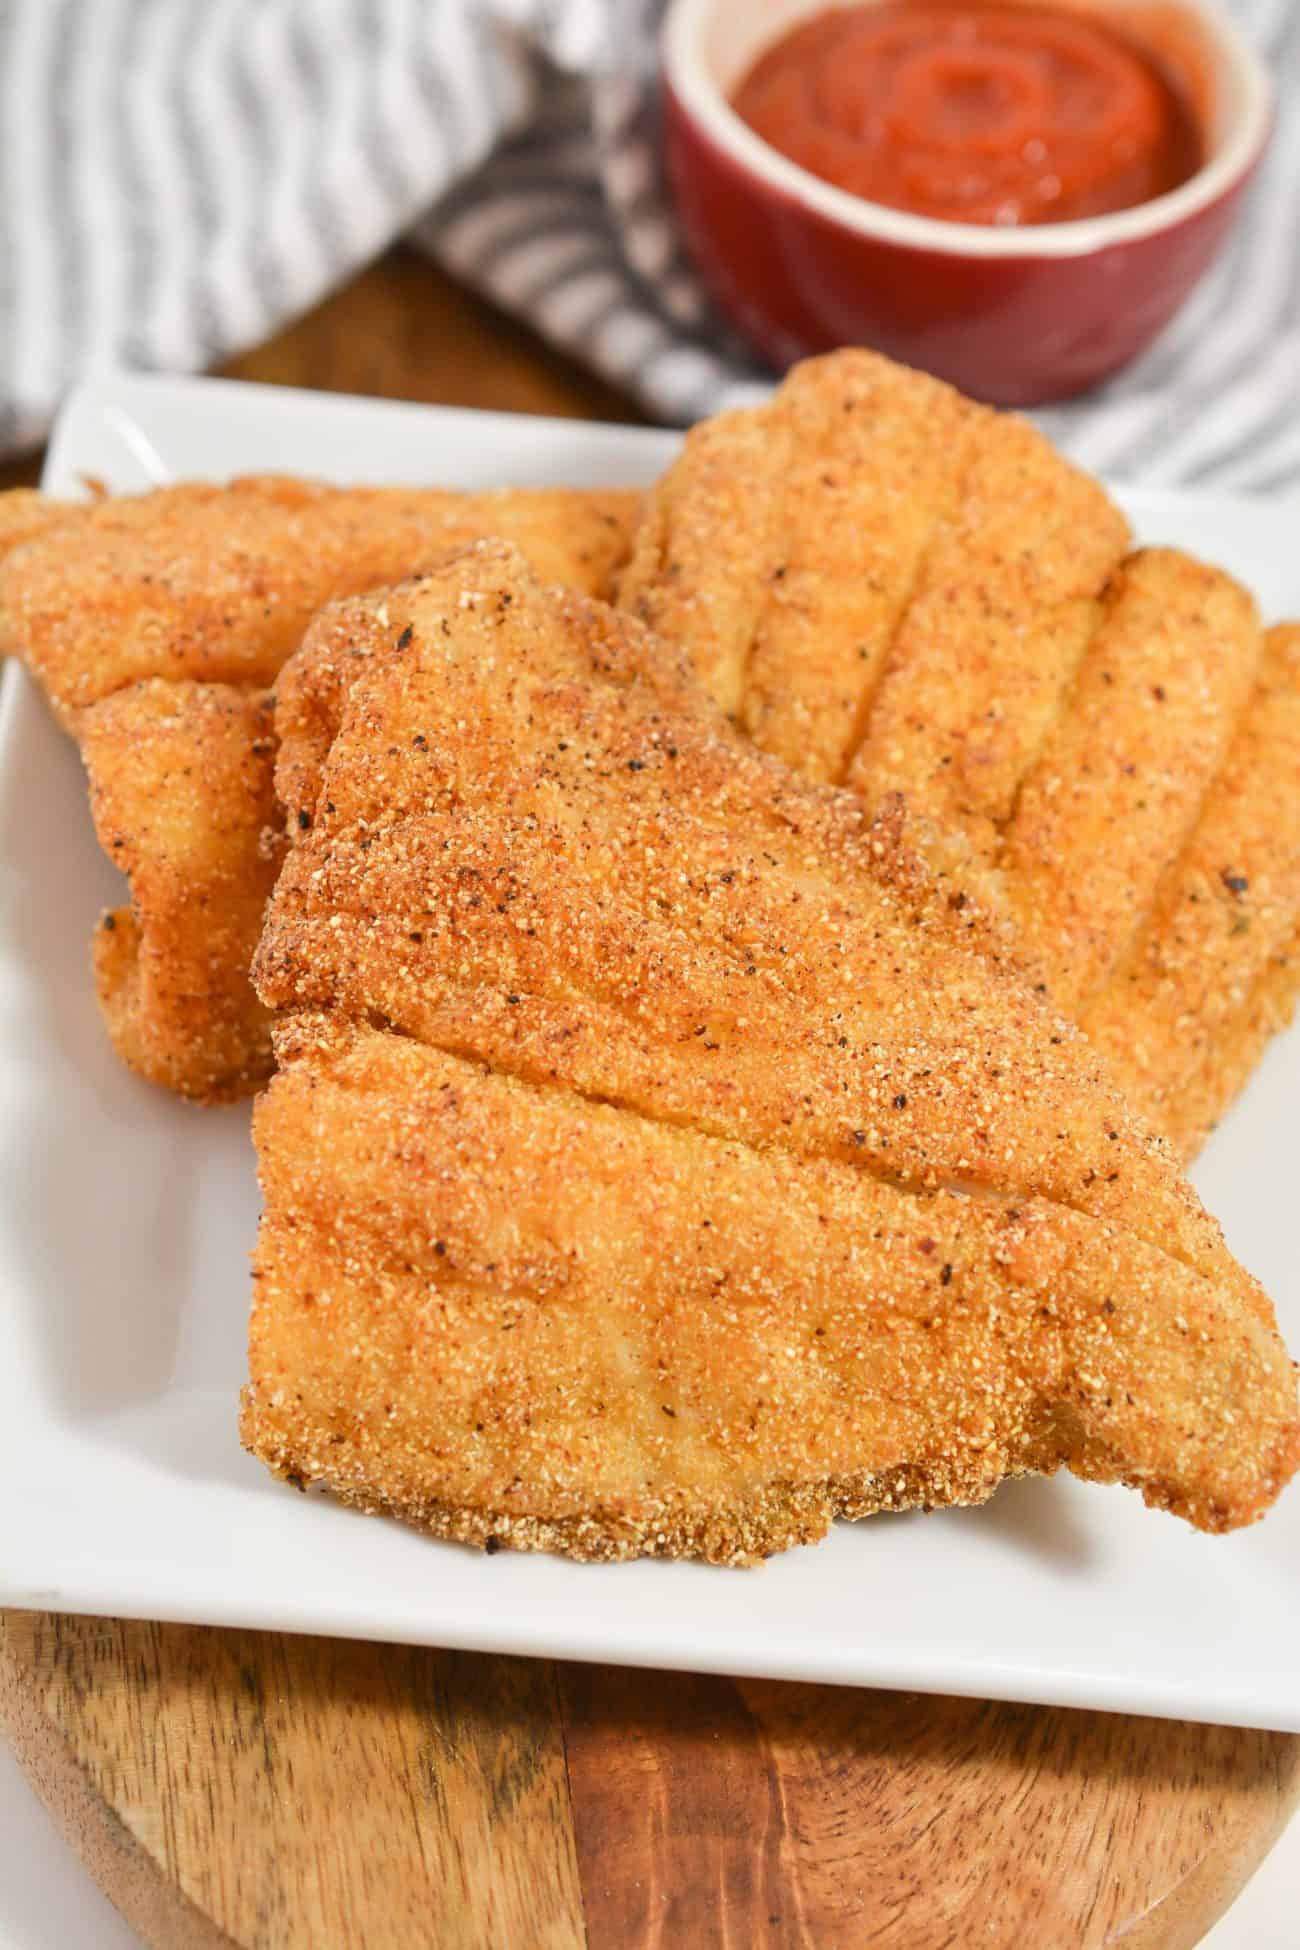 Classic Southern Fried Catfish